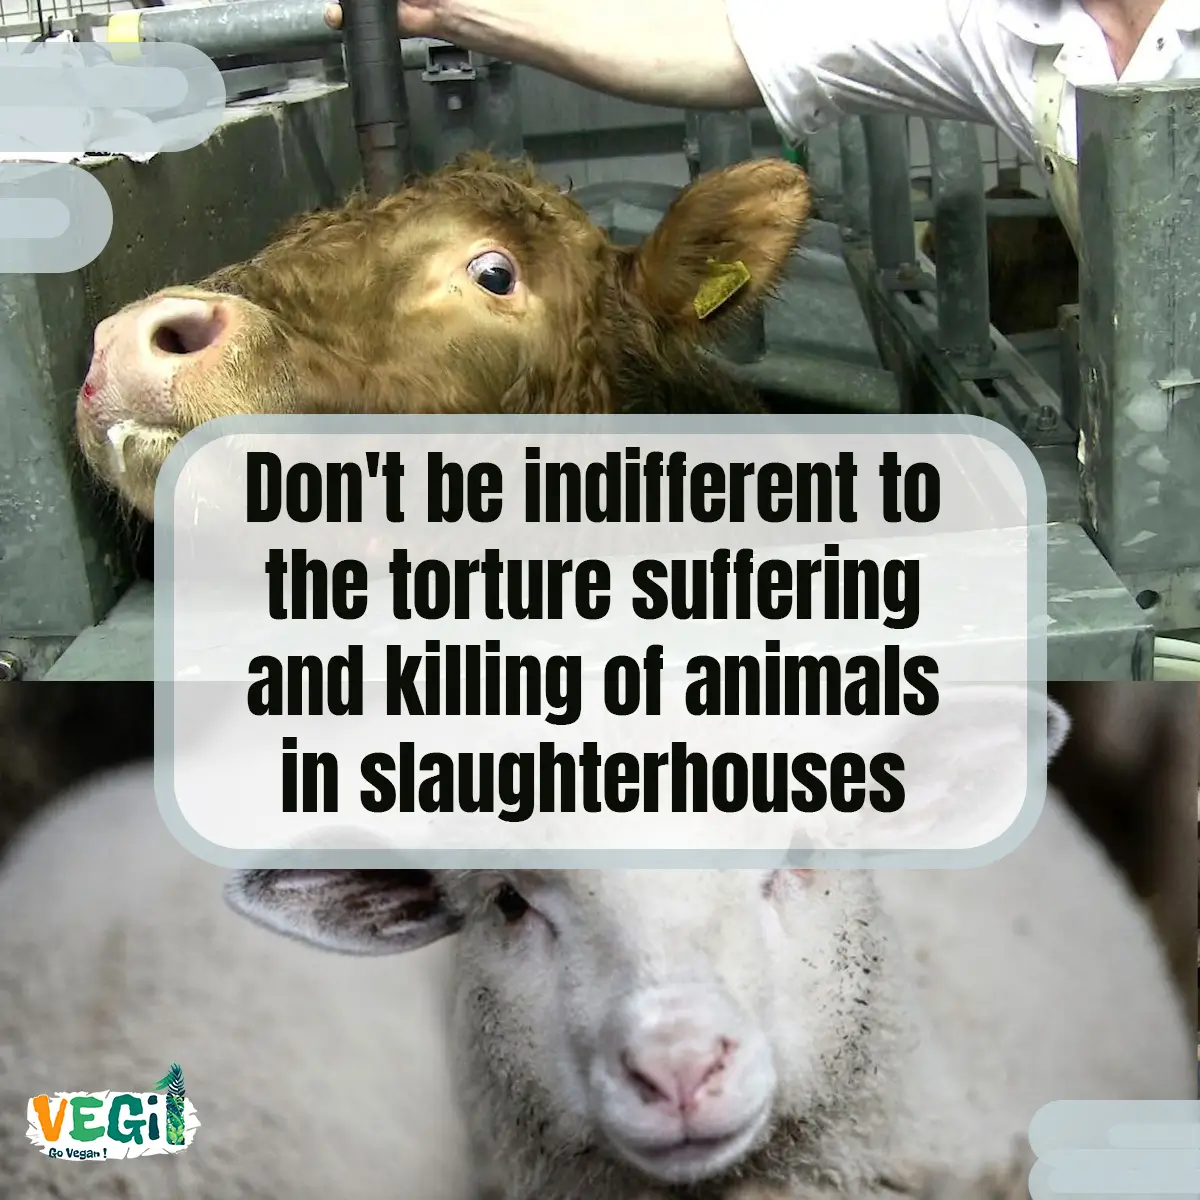 Don't be indifferent to the torture suffering and killing of animals in slaughterhouses